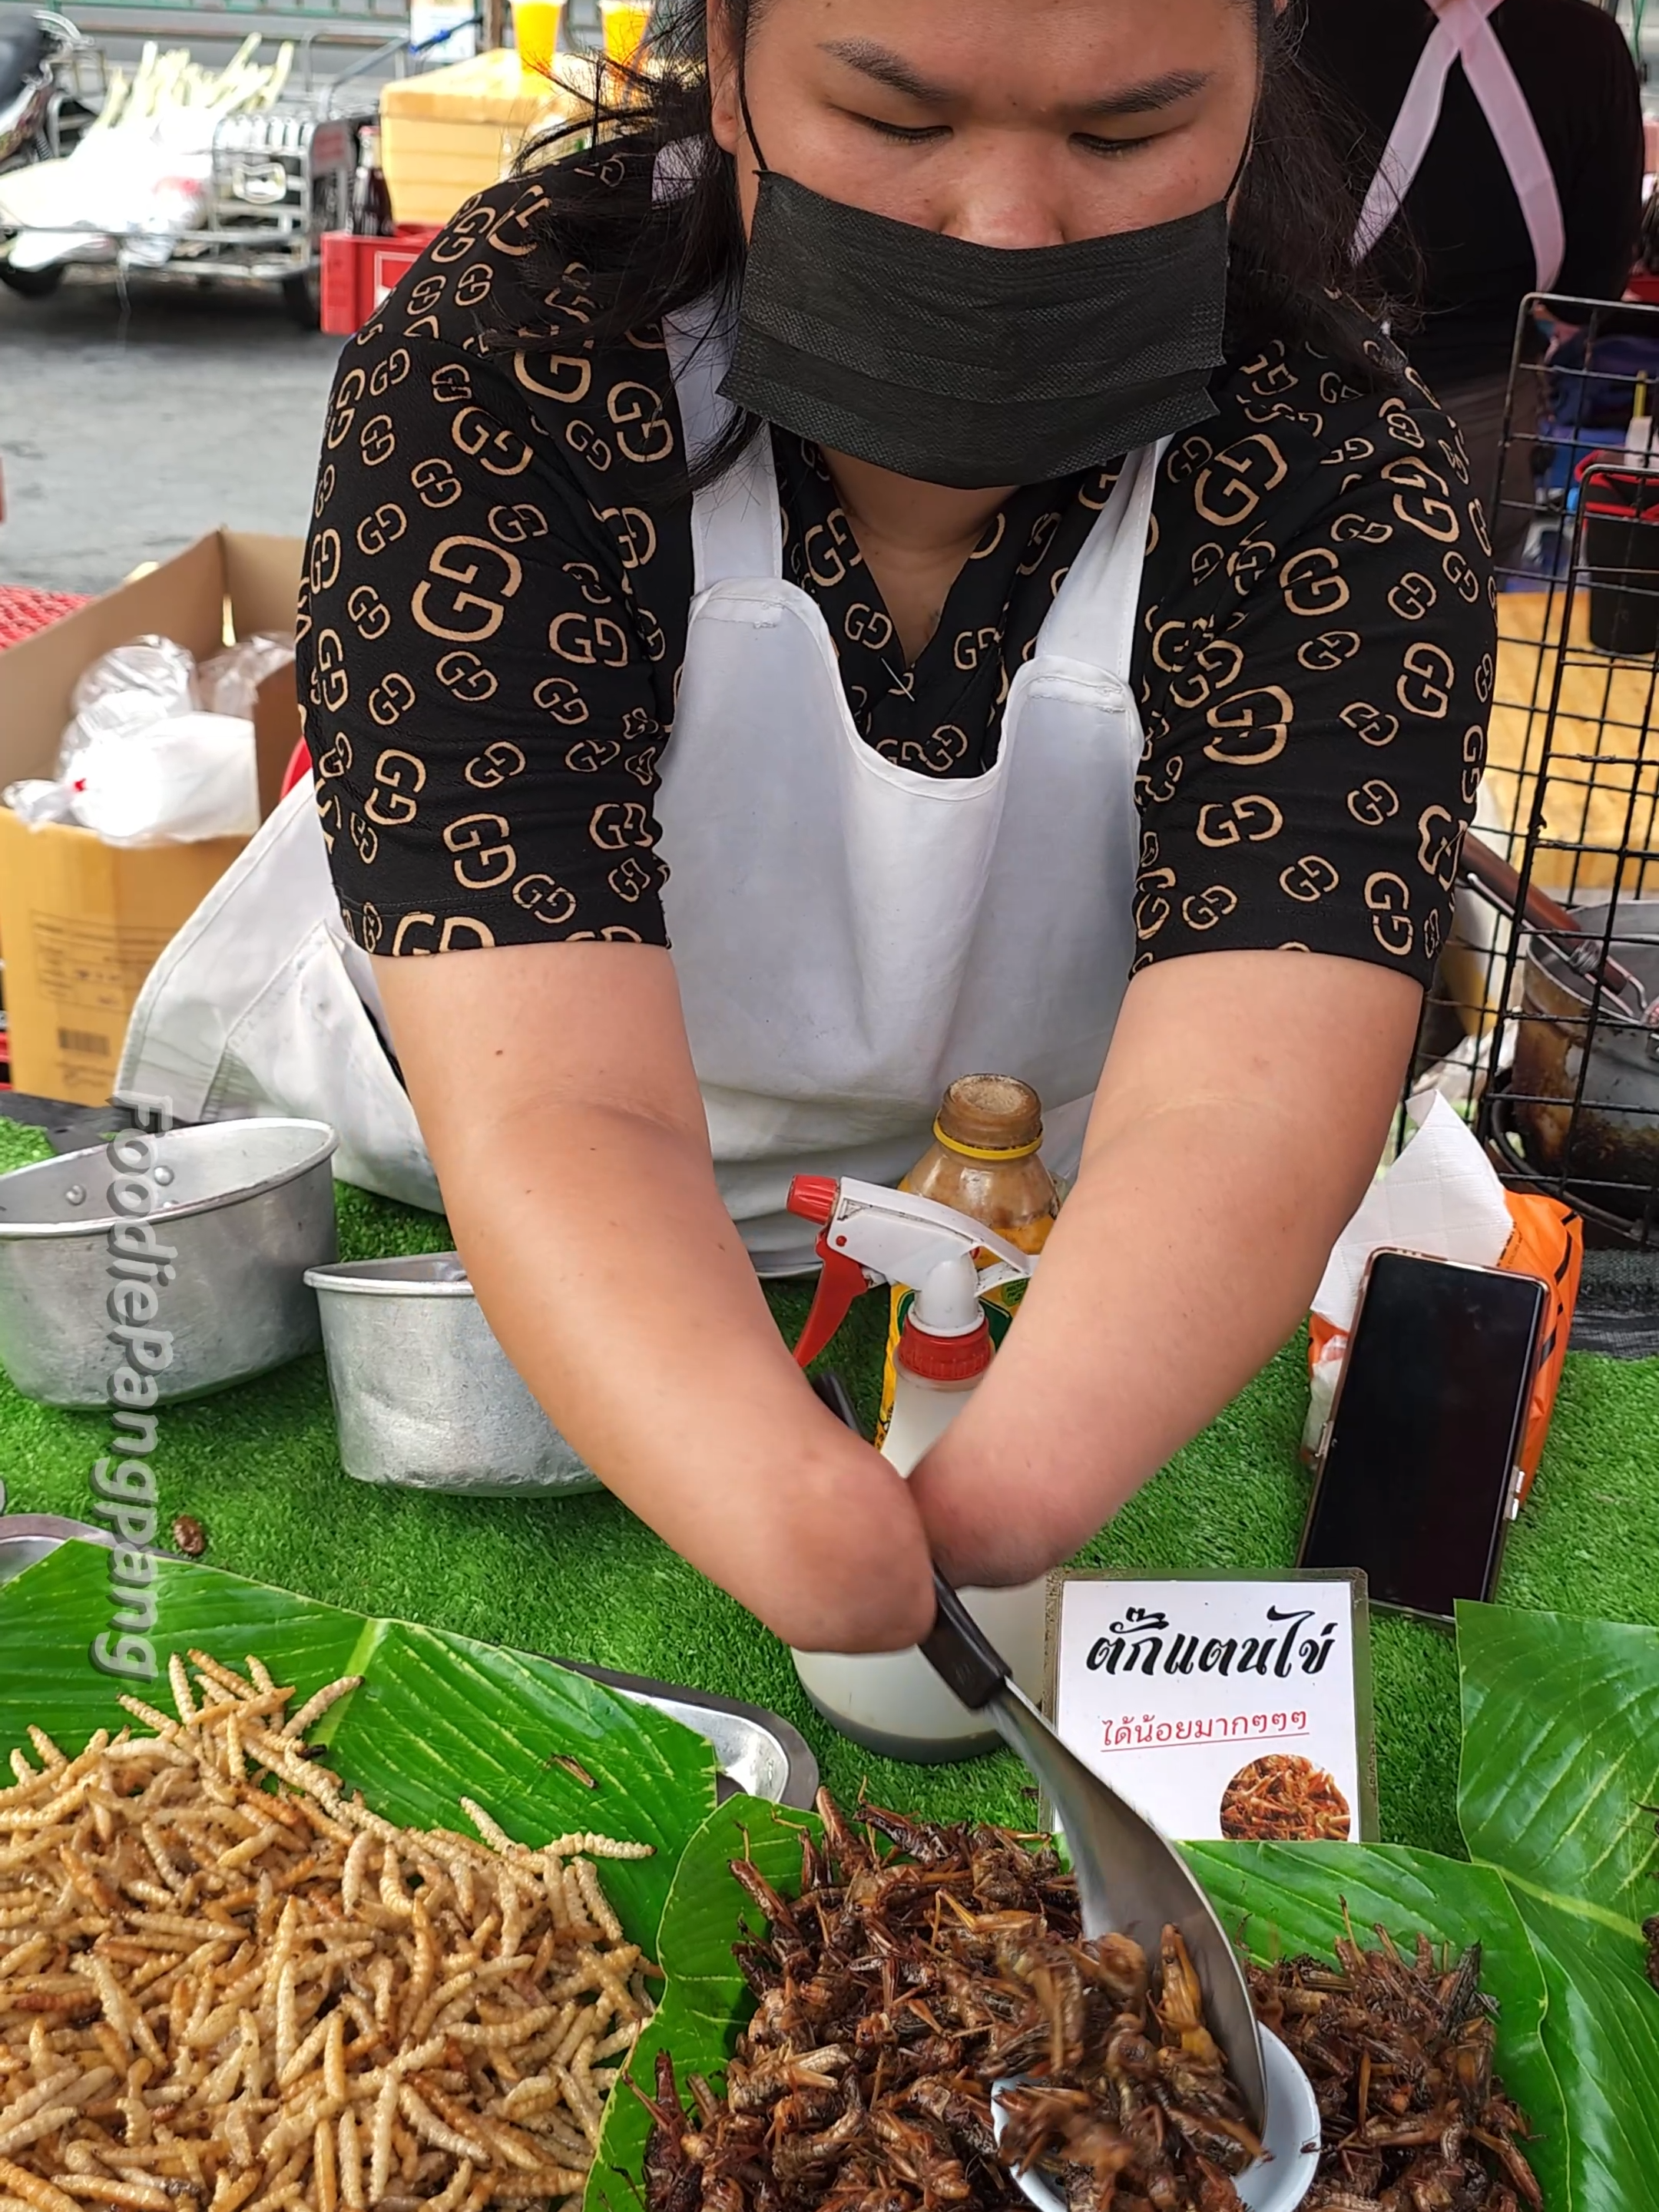 Fried insects sold by a respected mother in Thailand #tiktokfood #fyp #ramkhamhaeng #respect